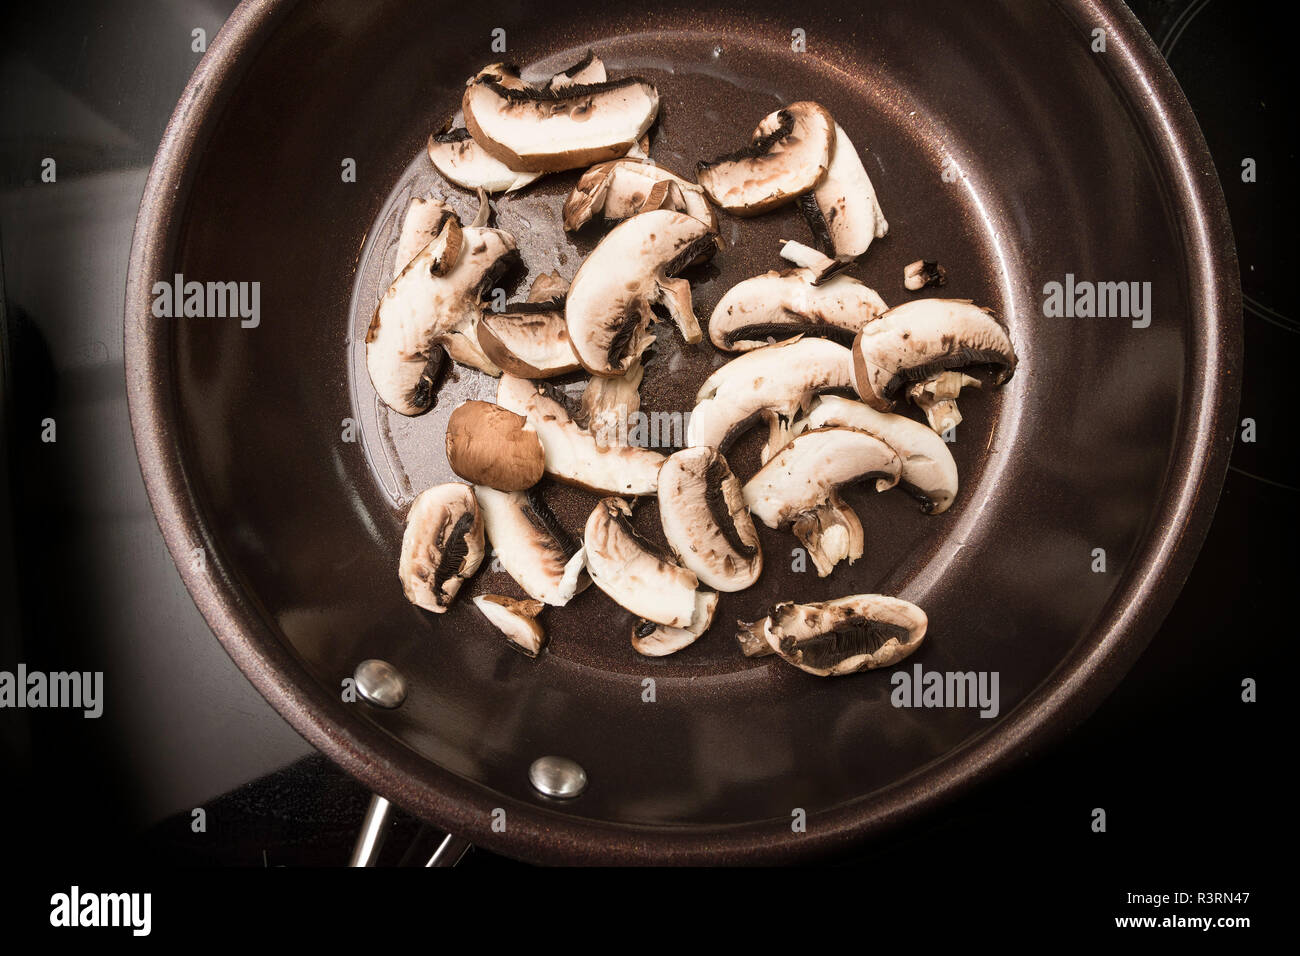 mushroom slices are fried in a cooking pan on the black stove, high angle view from above Stock Photo